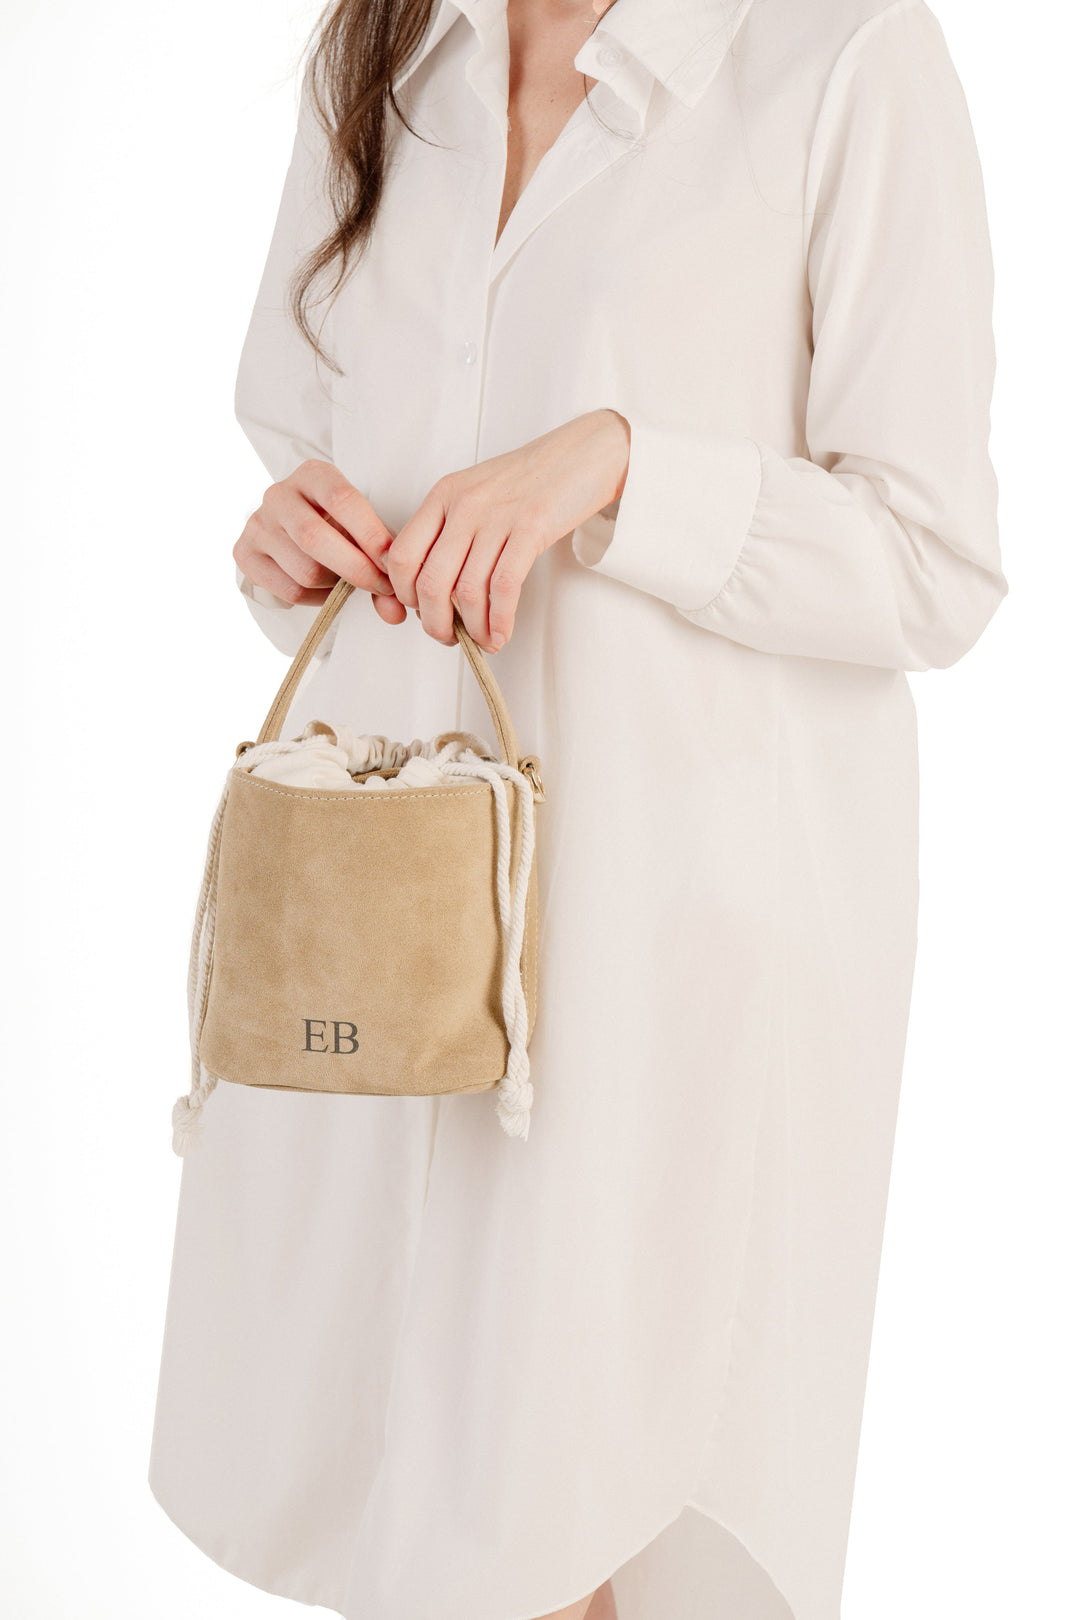 Woman in white dress holding a small beige suede handbag with rope handles